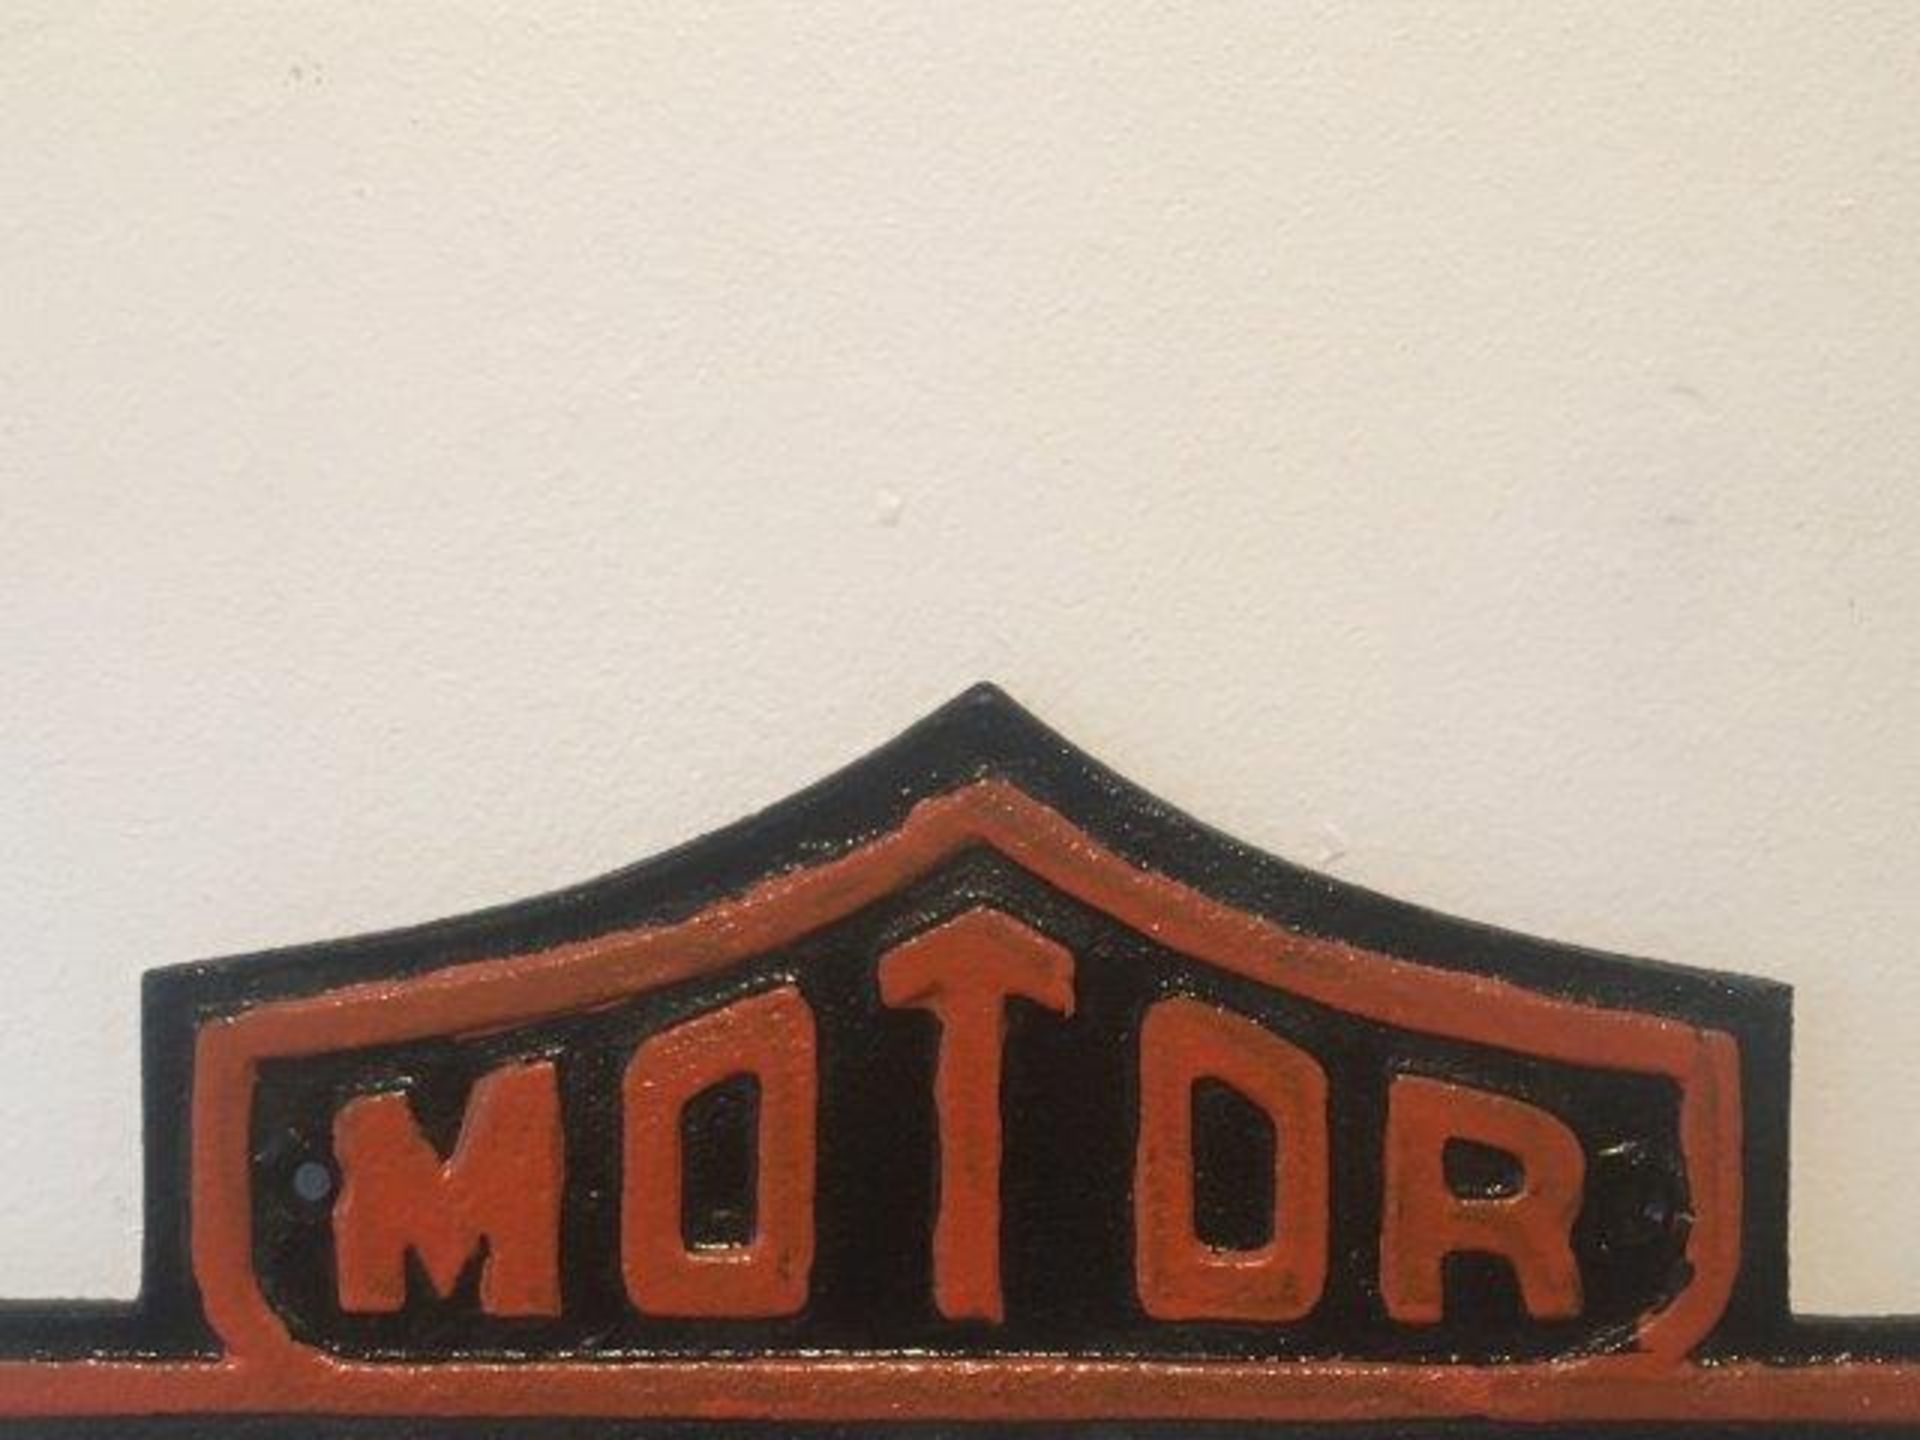 Harley Davidson Motorcycles Cast Iron Sign - Image 2 of 3